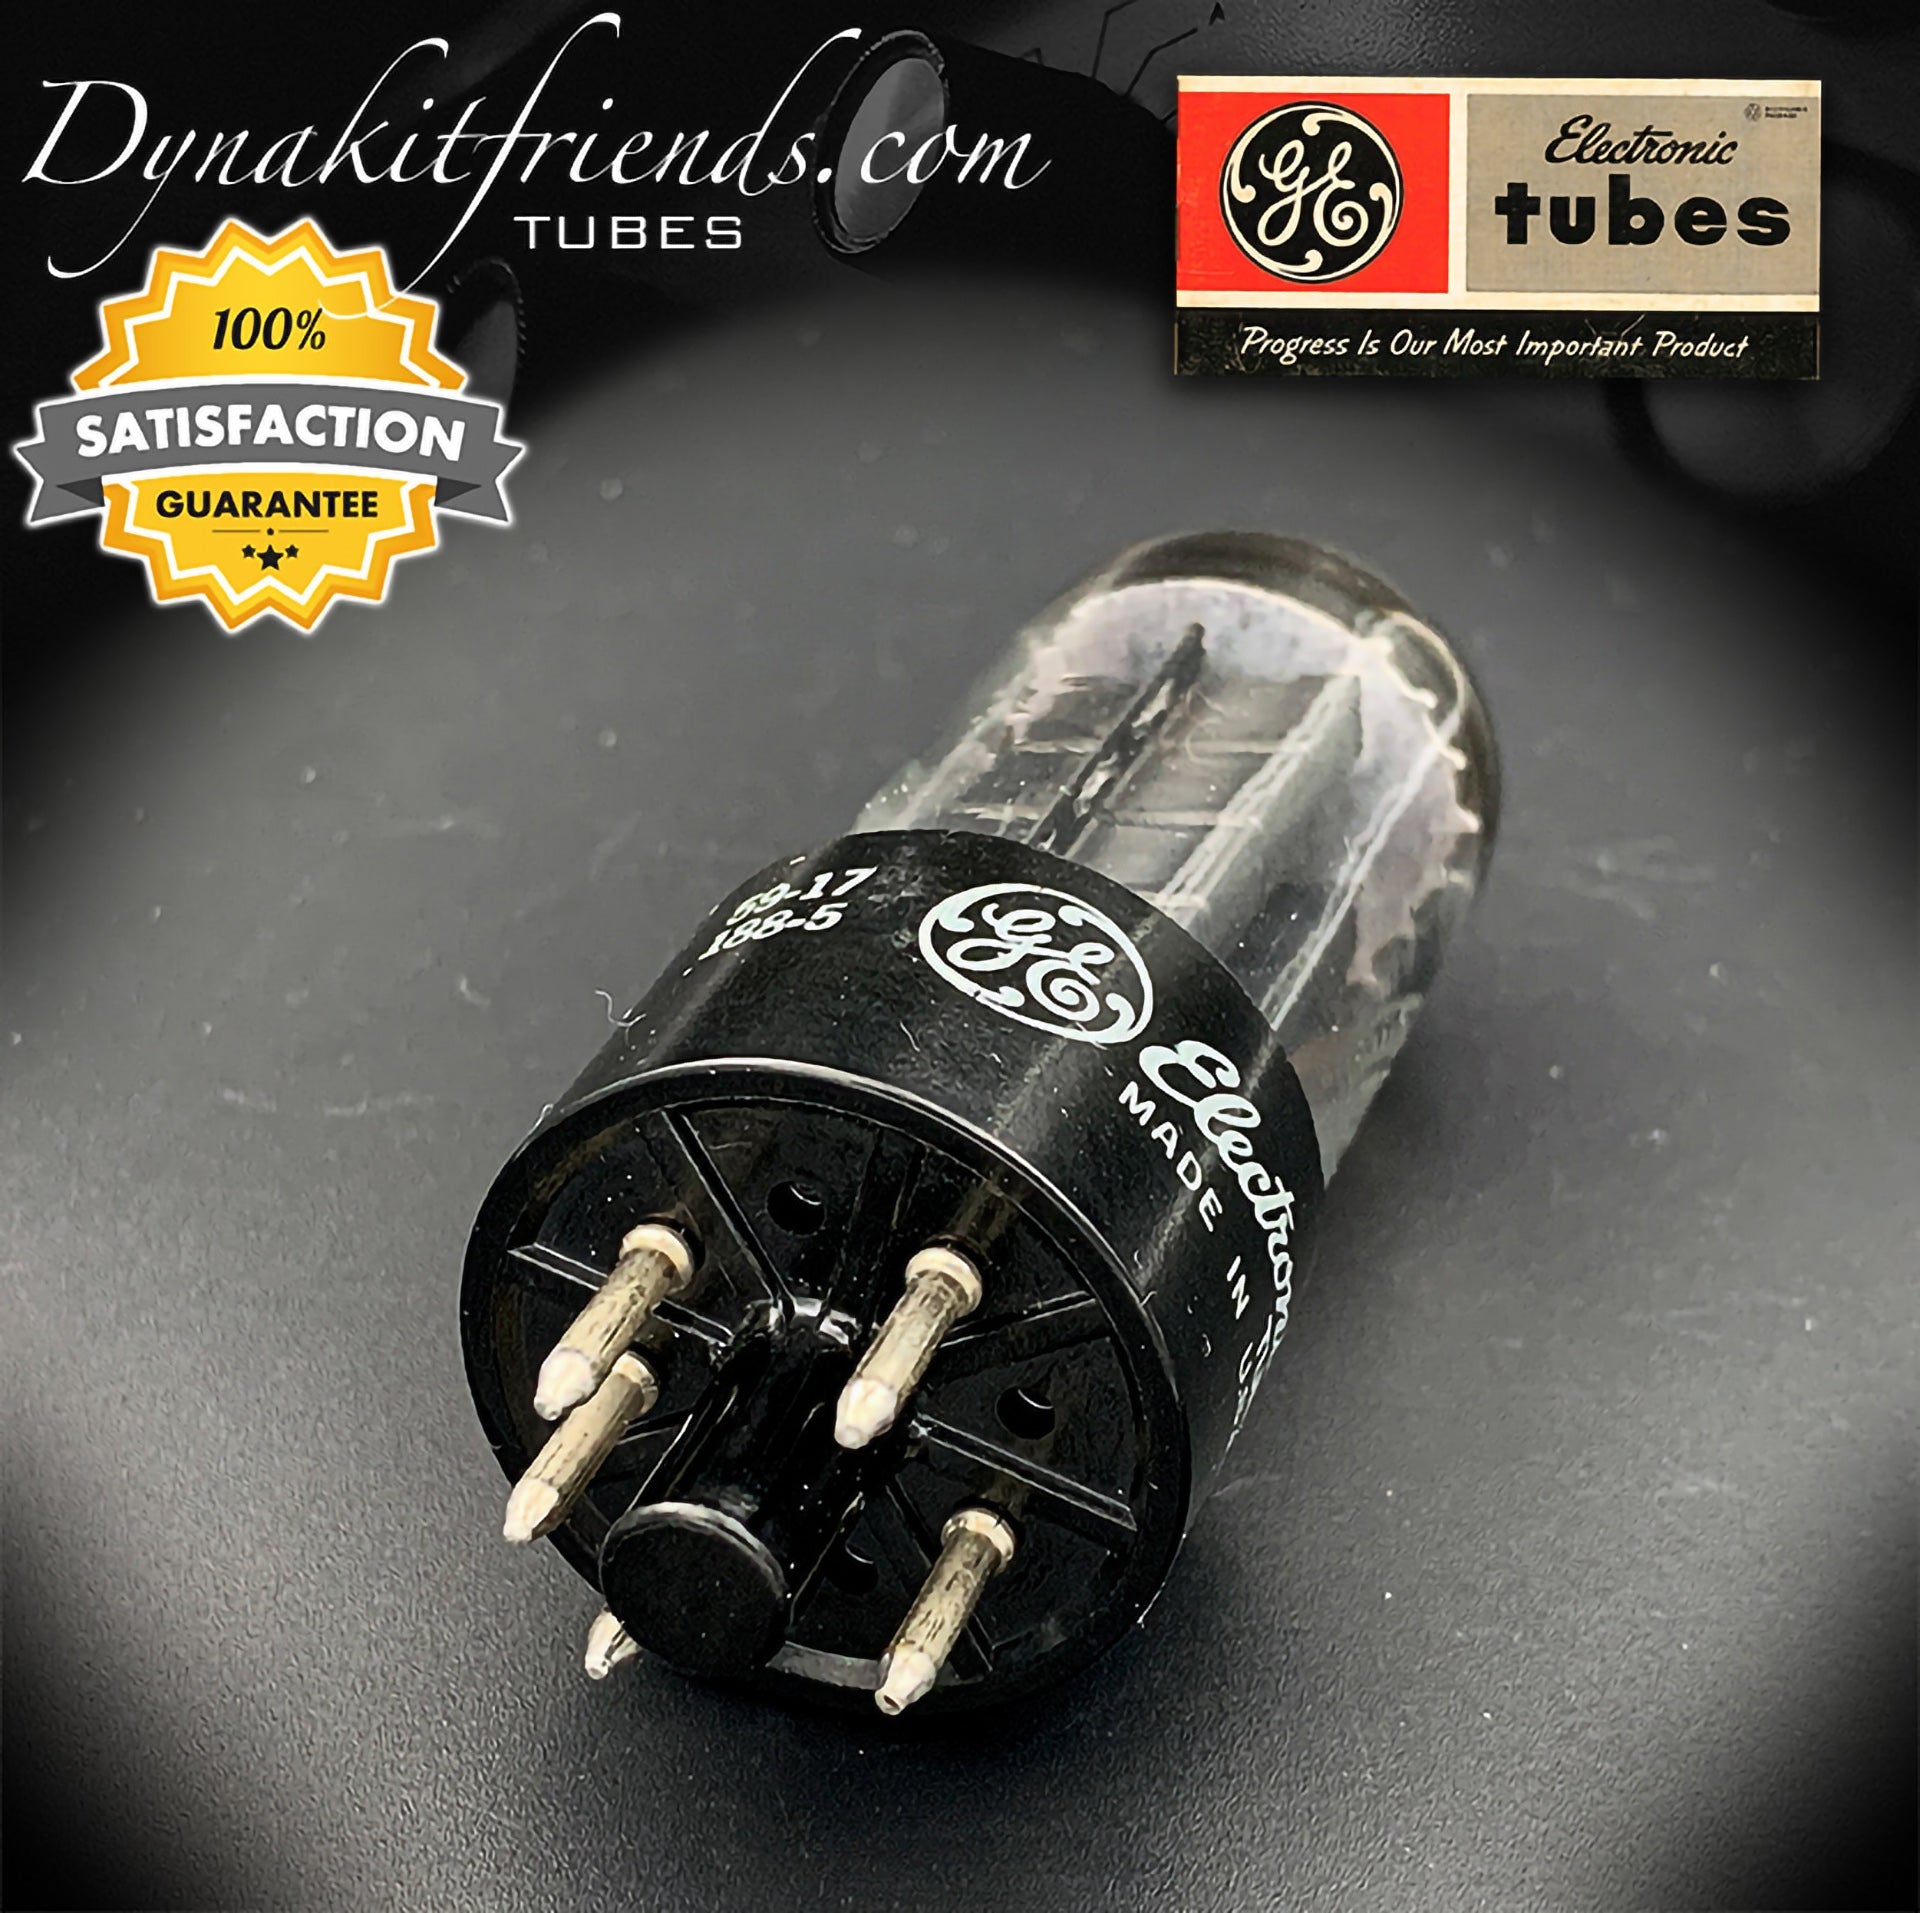 5Y3GT ( 5Y3GT/G ) GE NOS Black Plates O Getter Tube Rectifier Made in USA '59 - Vacuum Tubes Treasures